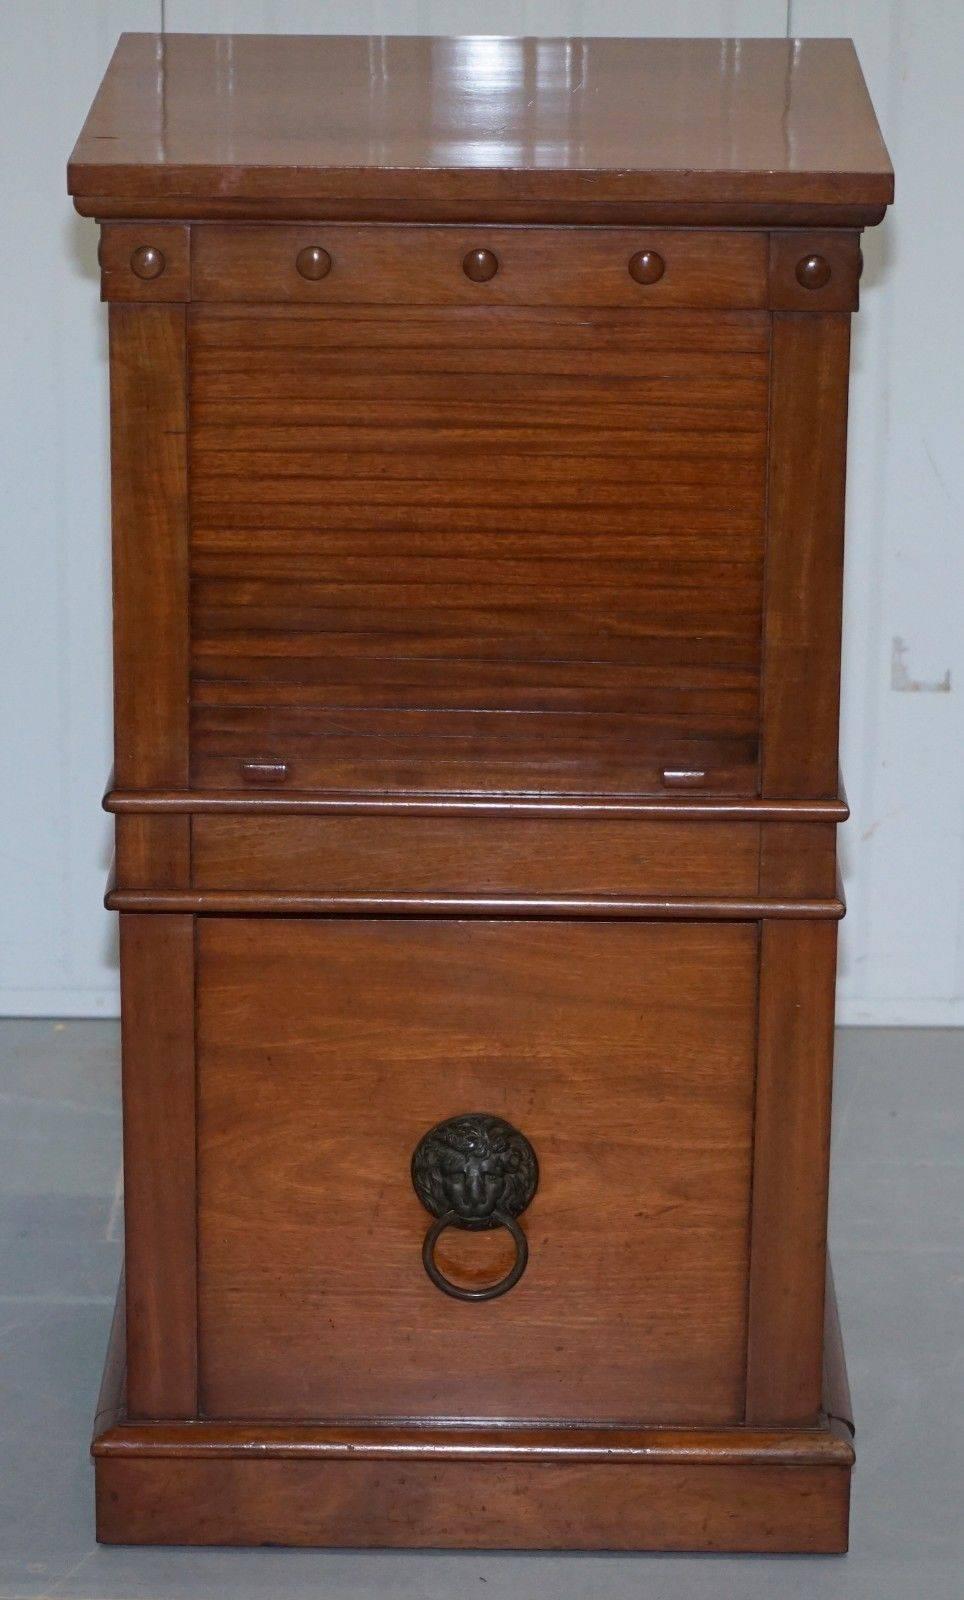 We are delighted to offer for sale this stunning and very rare Satin Walnut C Hindley & Son’s (1766-1895) drinks pedestal

A very good looking and function piece of furniture, it can be used as a display pedestal as the surface area is large